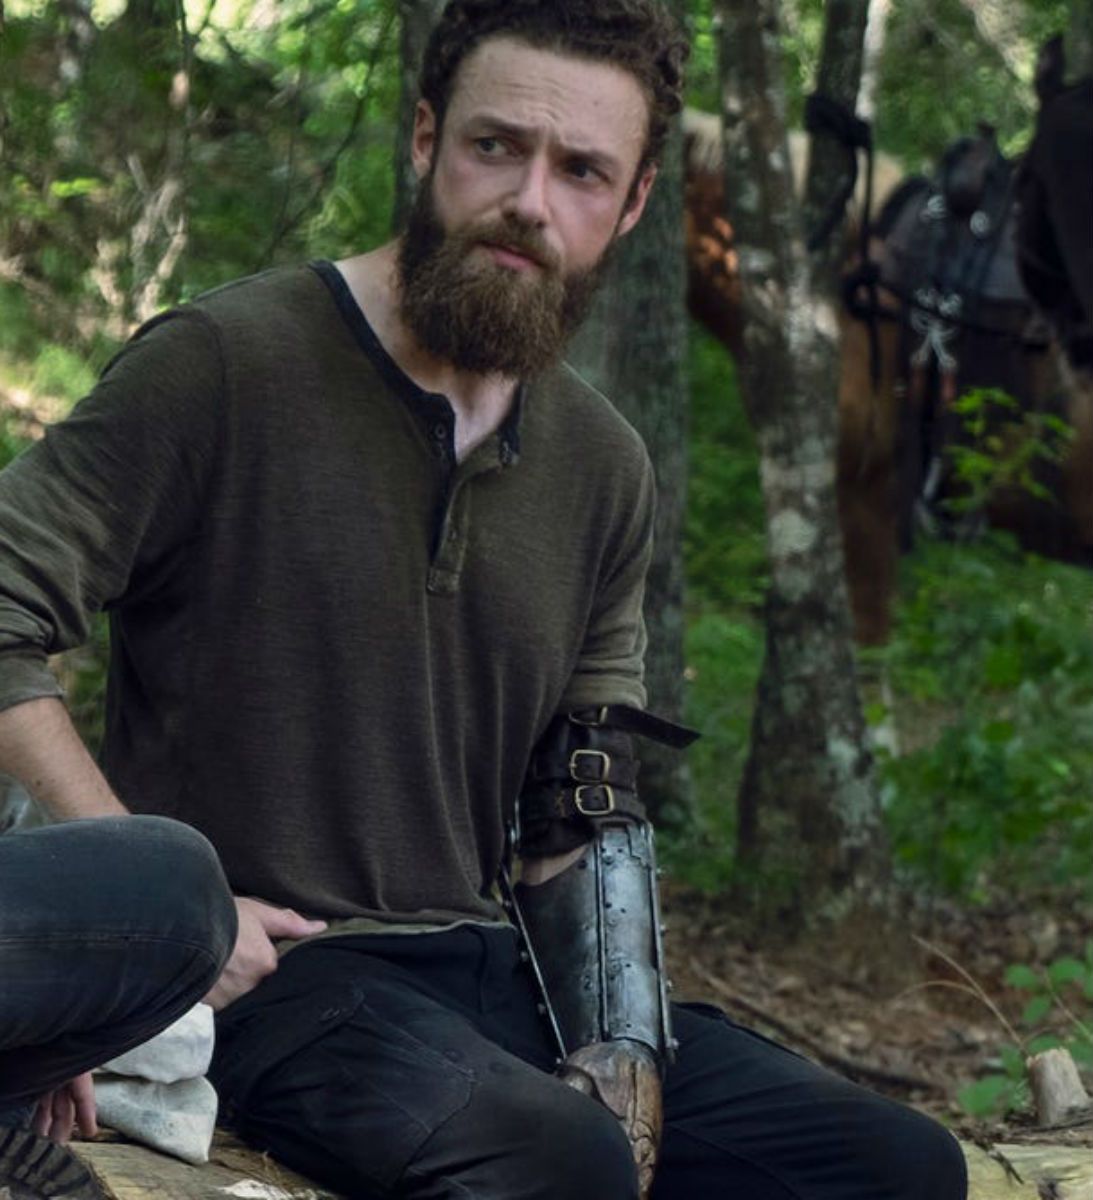 Aaron with a metal arm in The Walking Dead season 9 VERTICAL